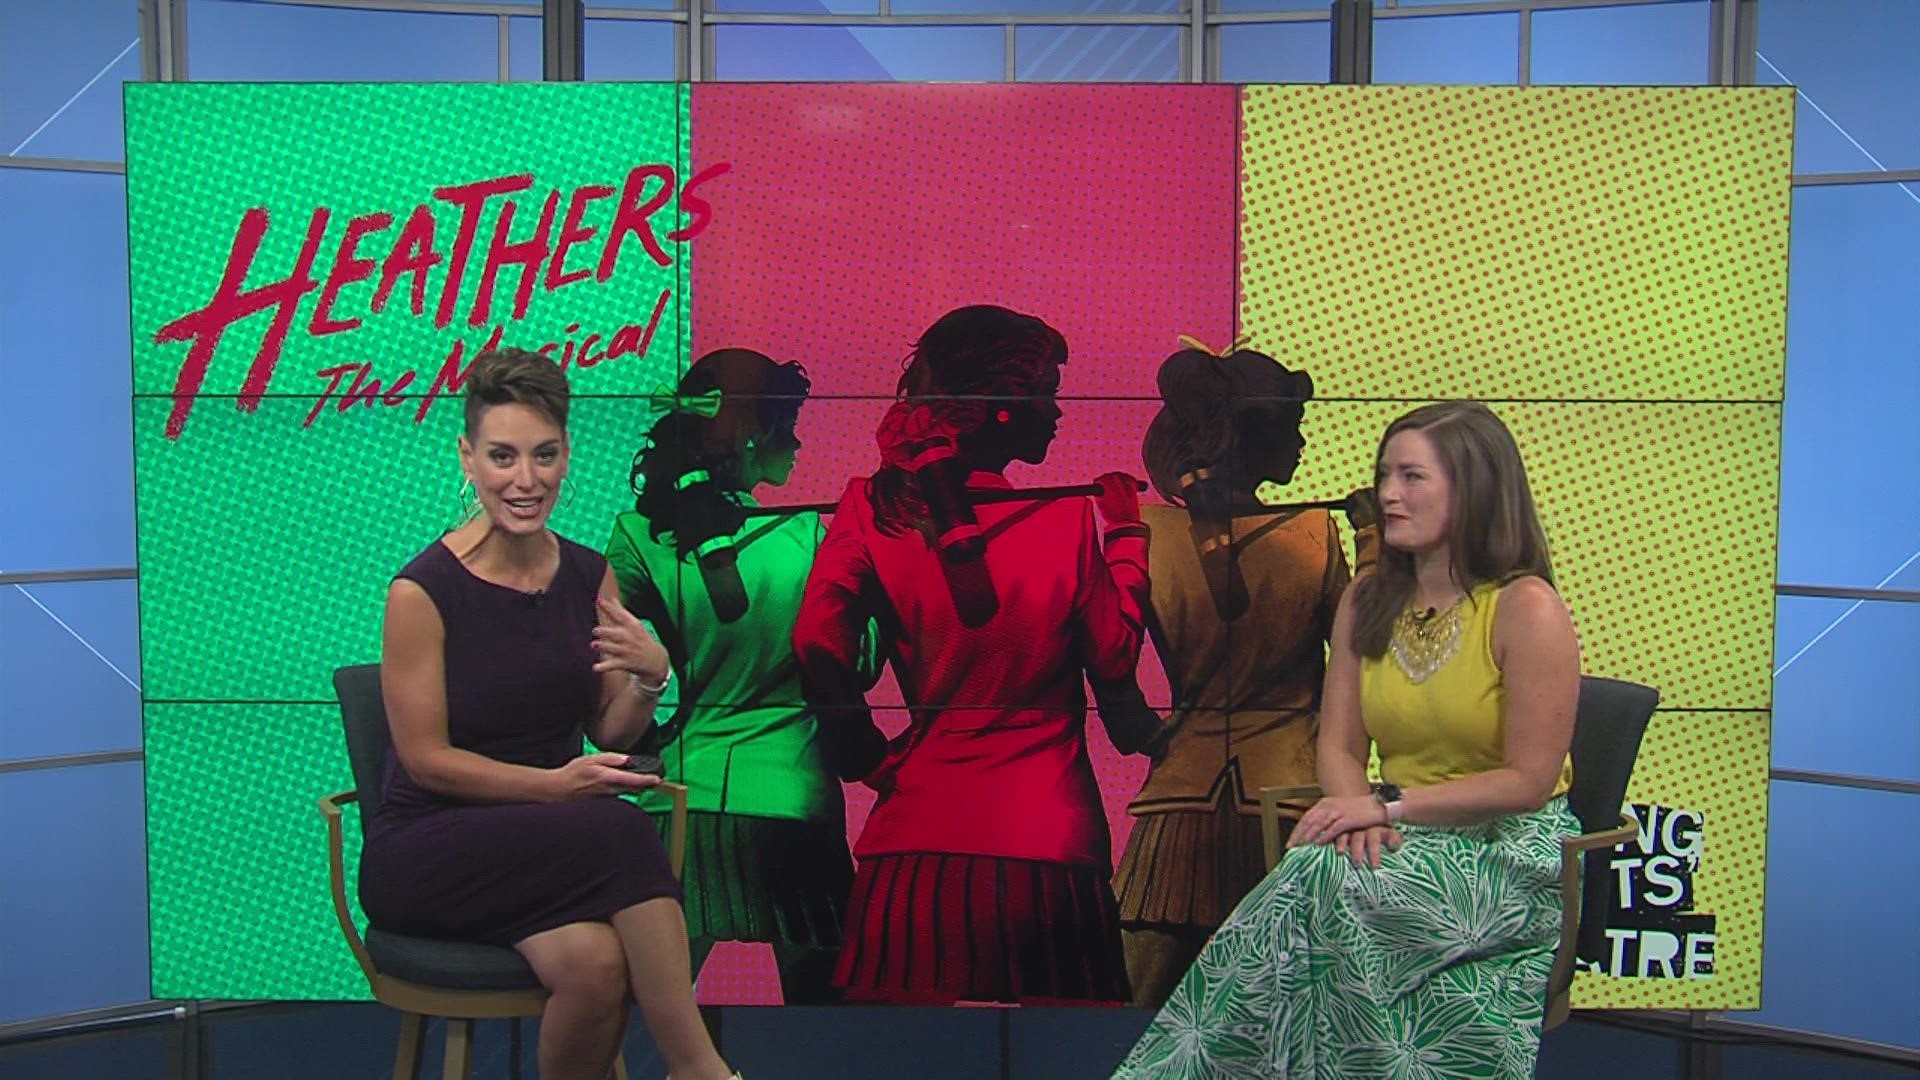 Des Moines Young Artists Theater will soon open Heathers The Musical, based on the 1998 movie. Director Megan Helmers shares the details.